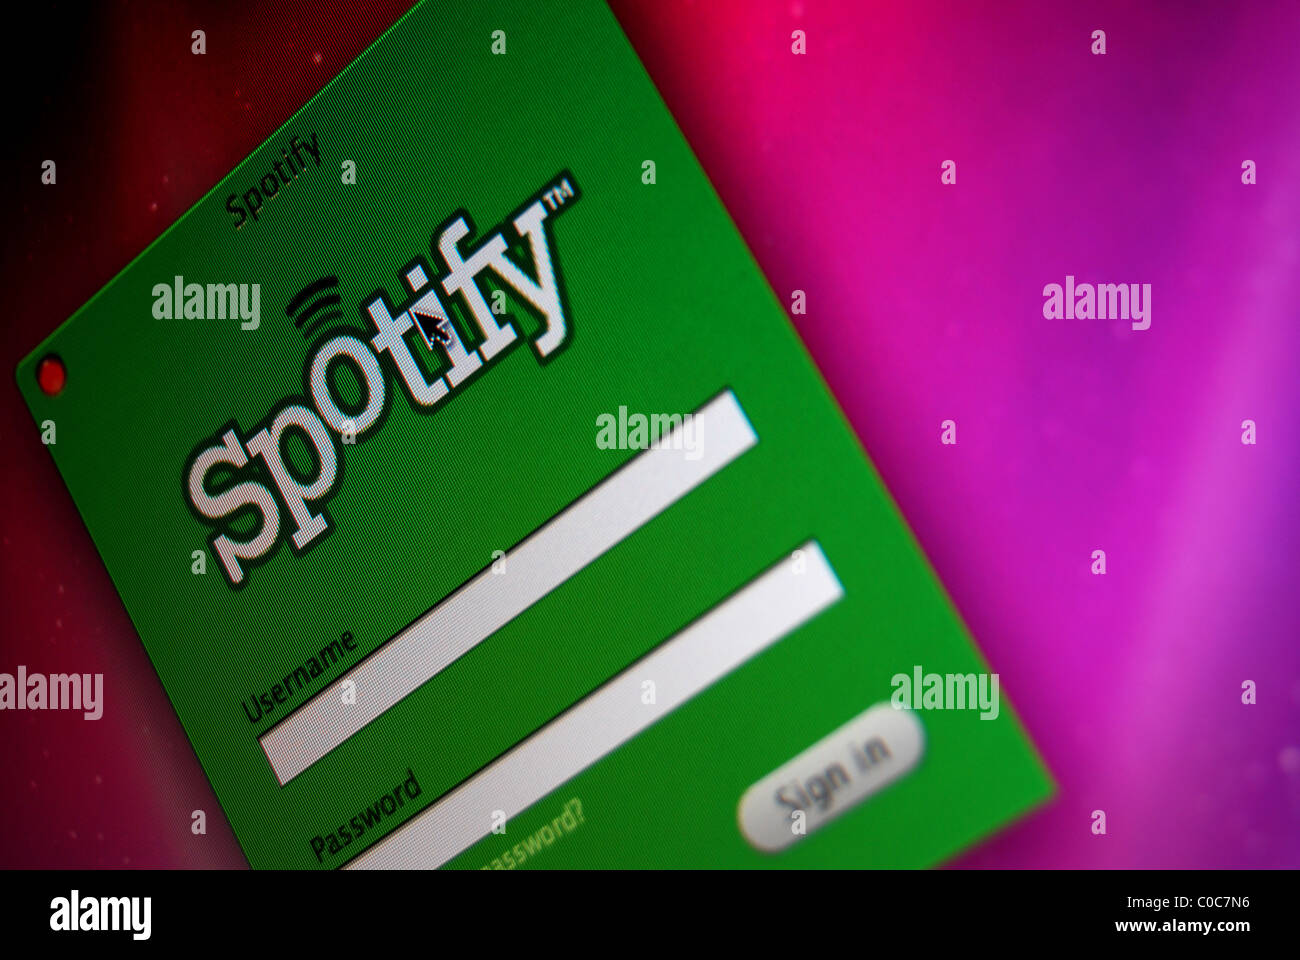 Photo Illustration of the Spotify Music Streaming Login On The Desktop Of A Apple MacBook Using OS X Snow Leopard Stock Photo